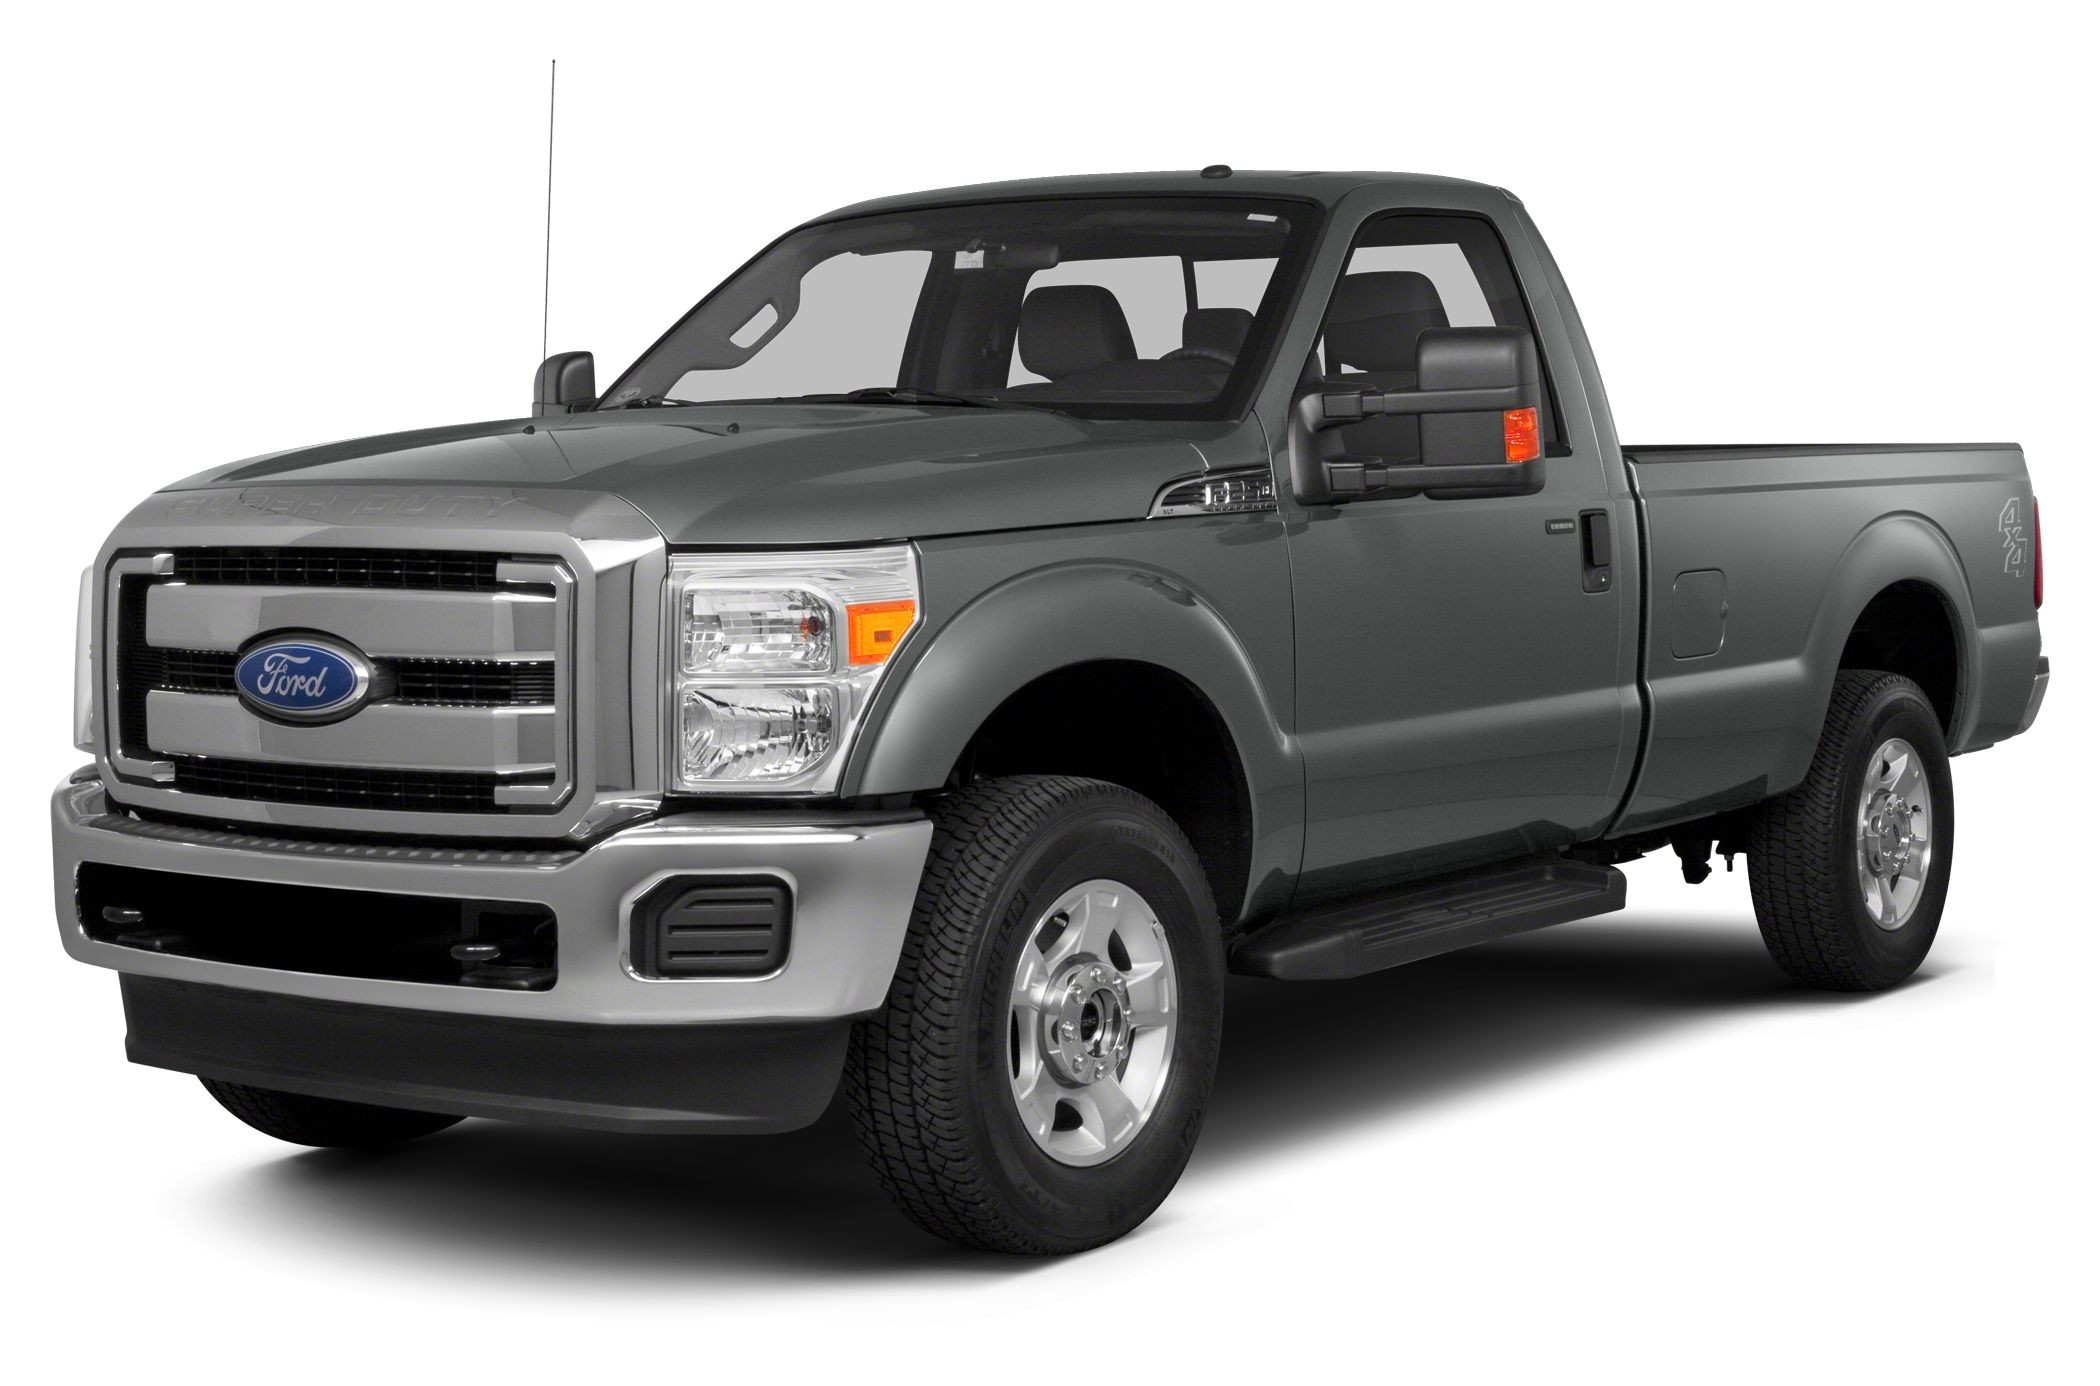 2014 FORD F-250